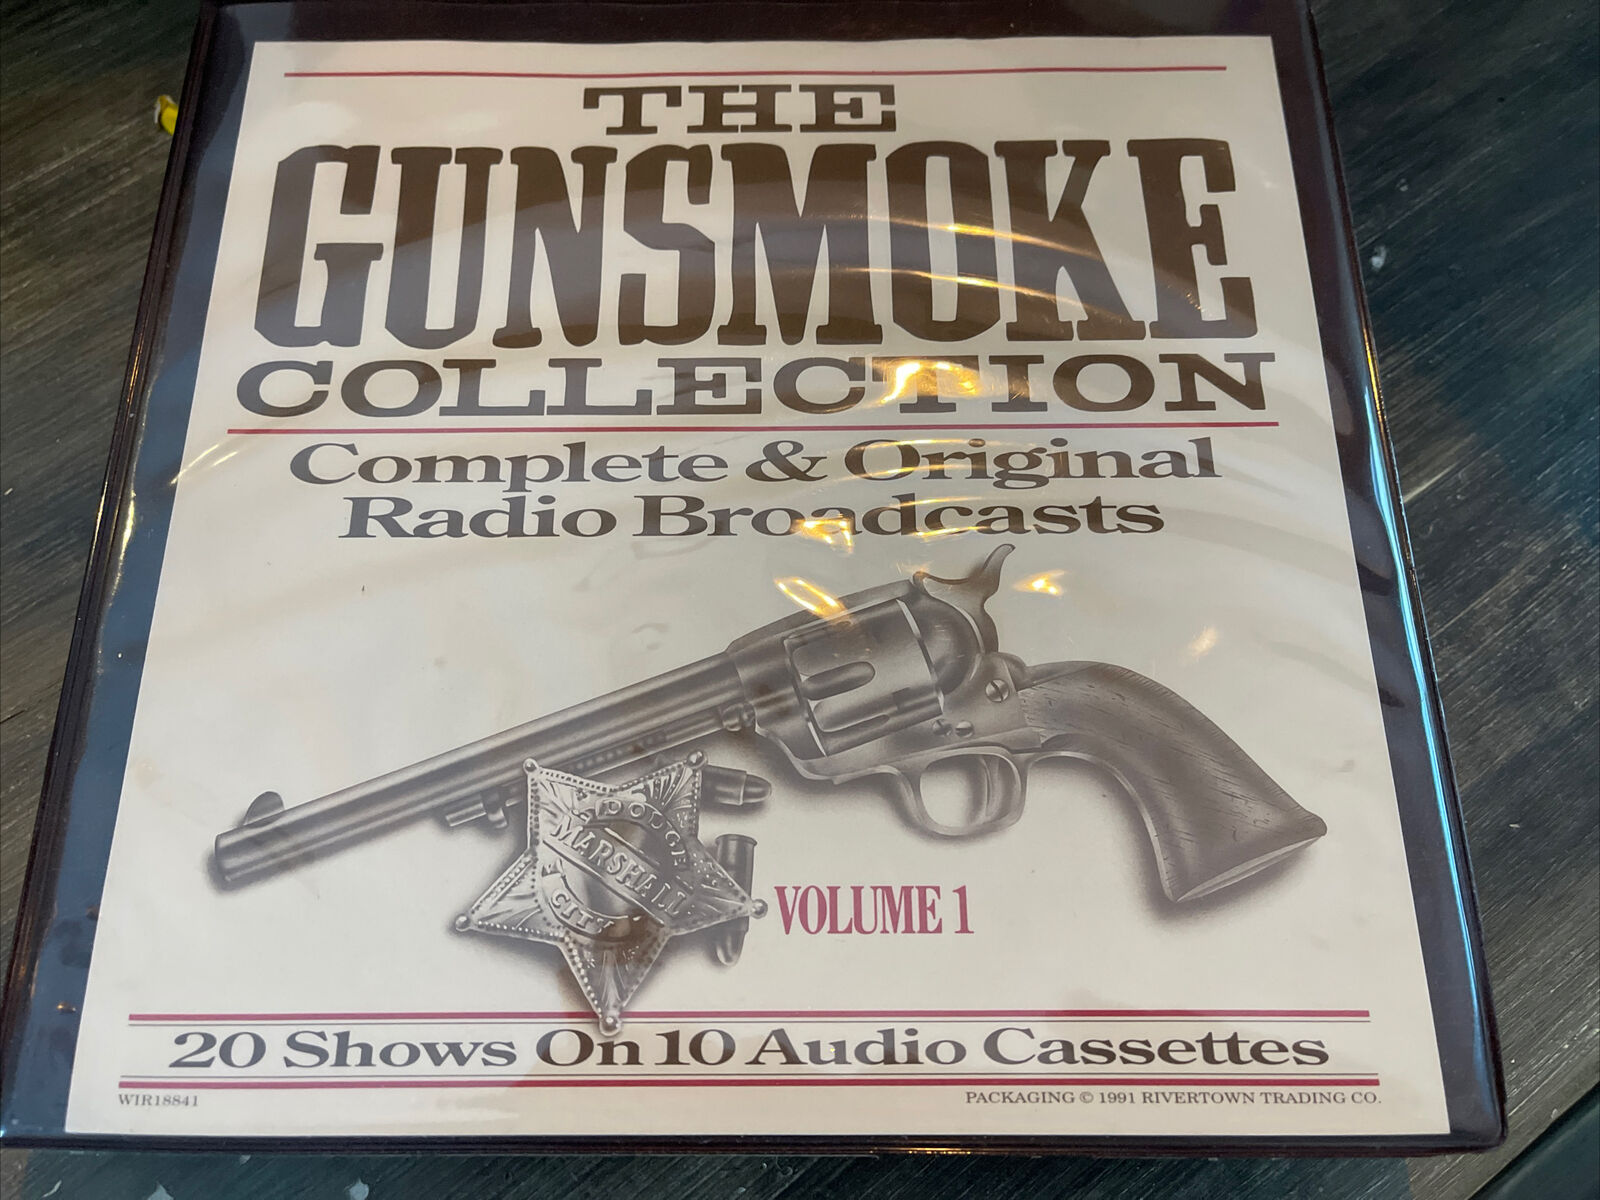 GUNSMOKE COLLECTION Vol 1 OLD TIME RADIO BROADCAST 10 AUDIO CASSETTES 20 SHOWS 